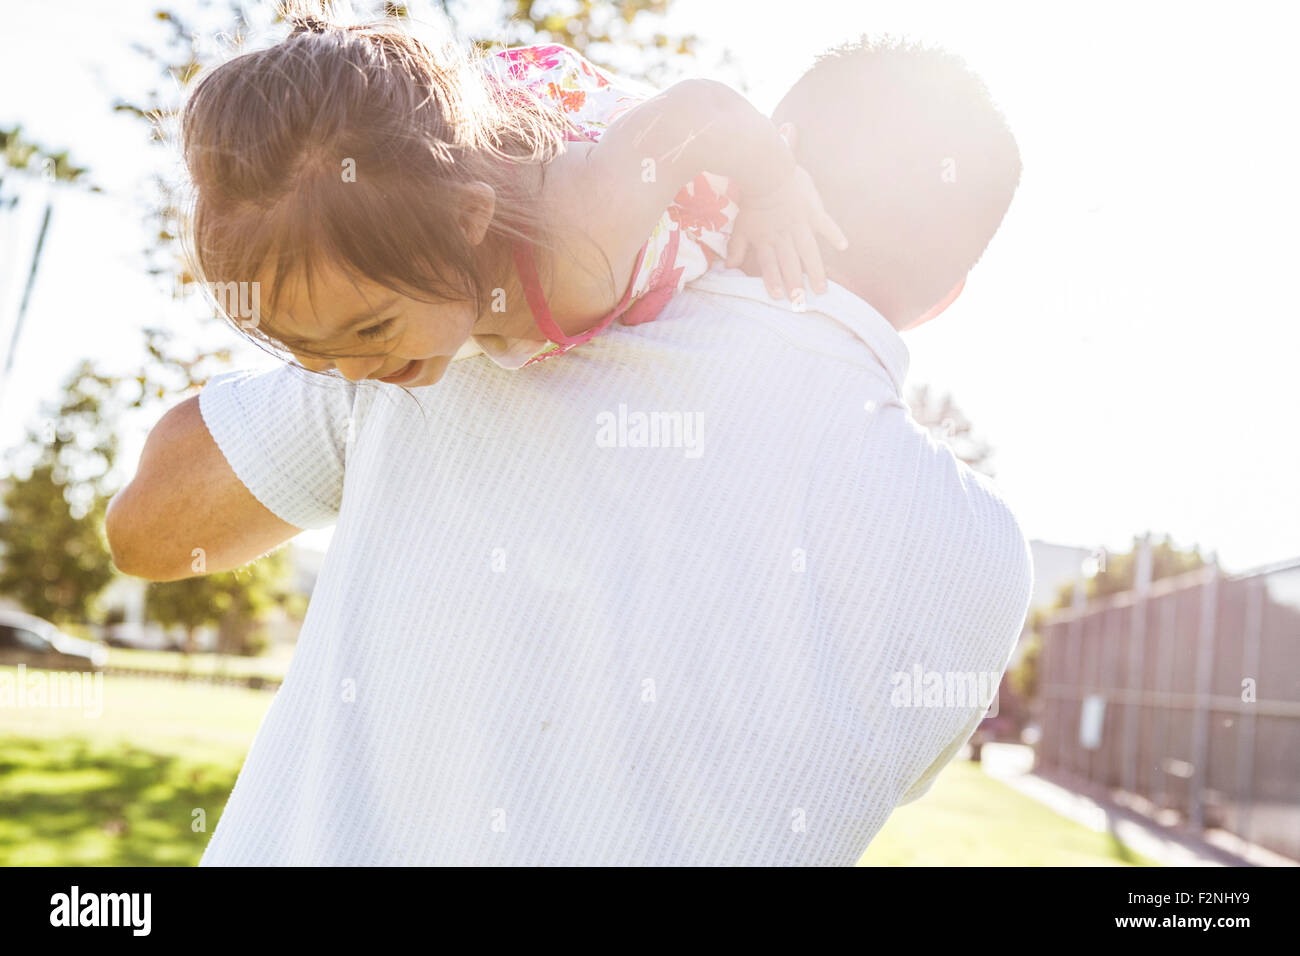 Hispanic father carrying daughter on shoulders Stock Photo